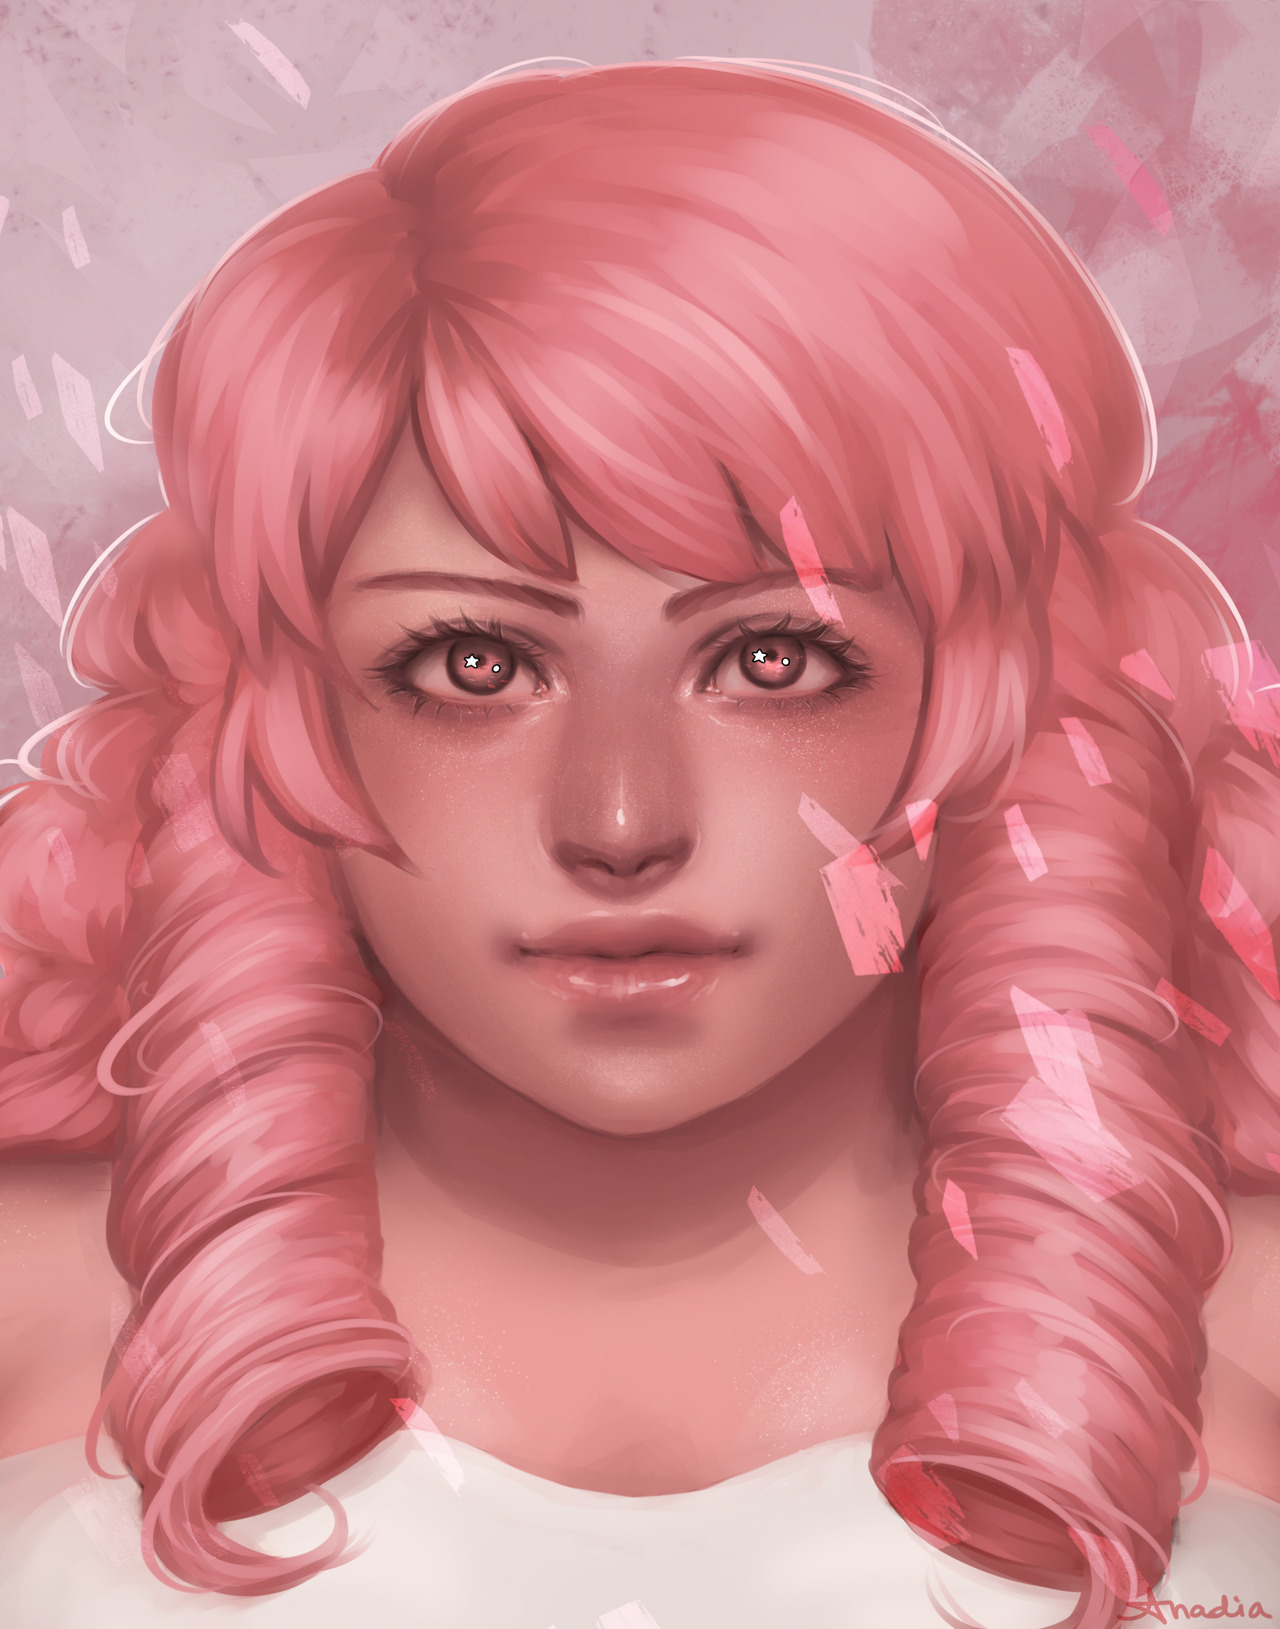 I only just recently watched Steven Universe and I wanted to draw the lovely Rose Quartz immediately. She was really fun to paint and I tried to capture her in my own style :)